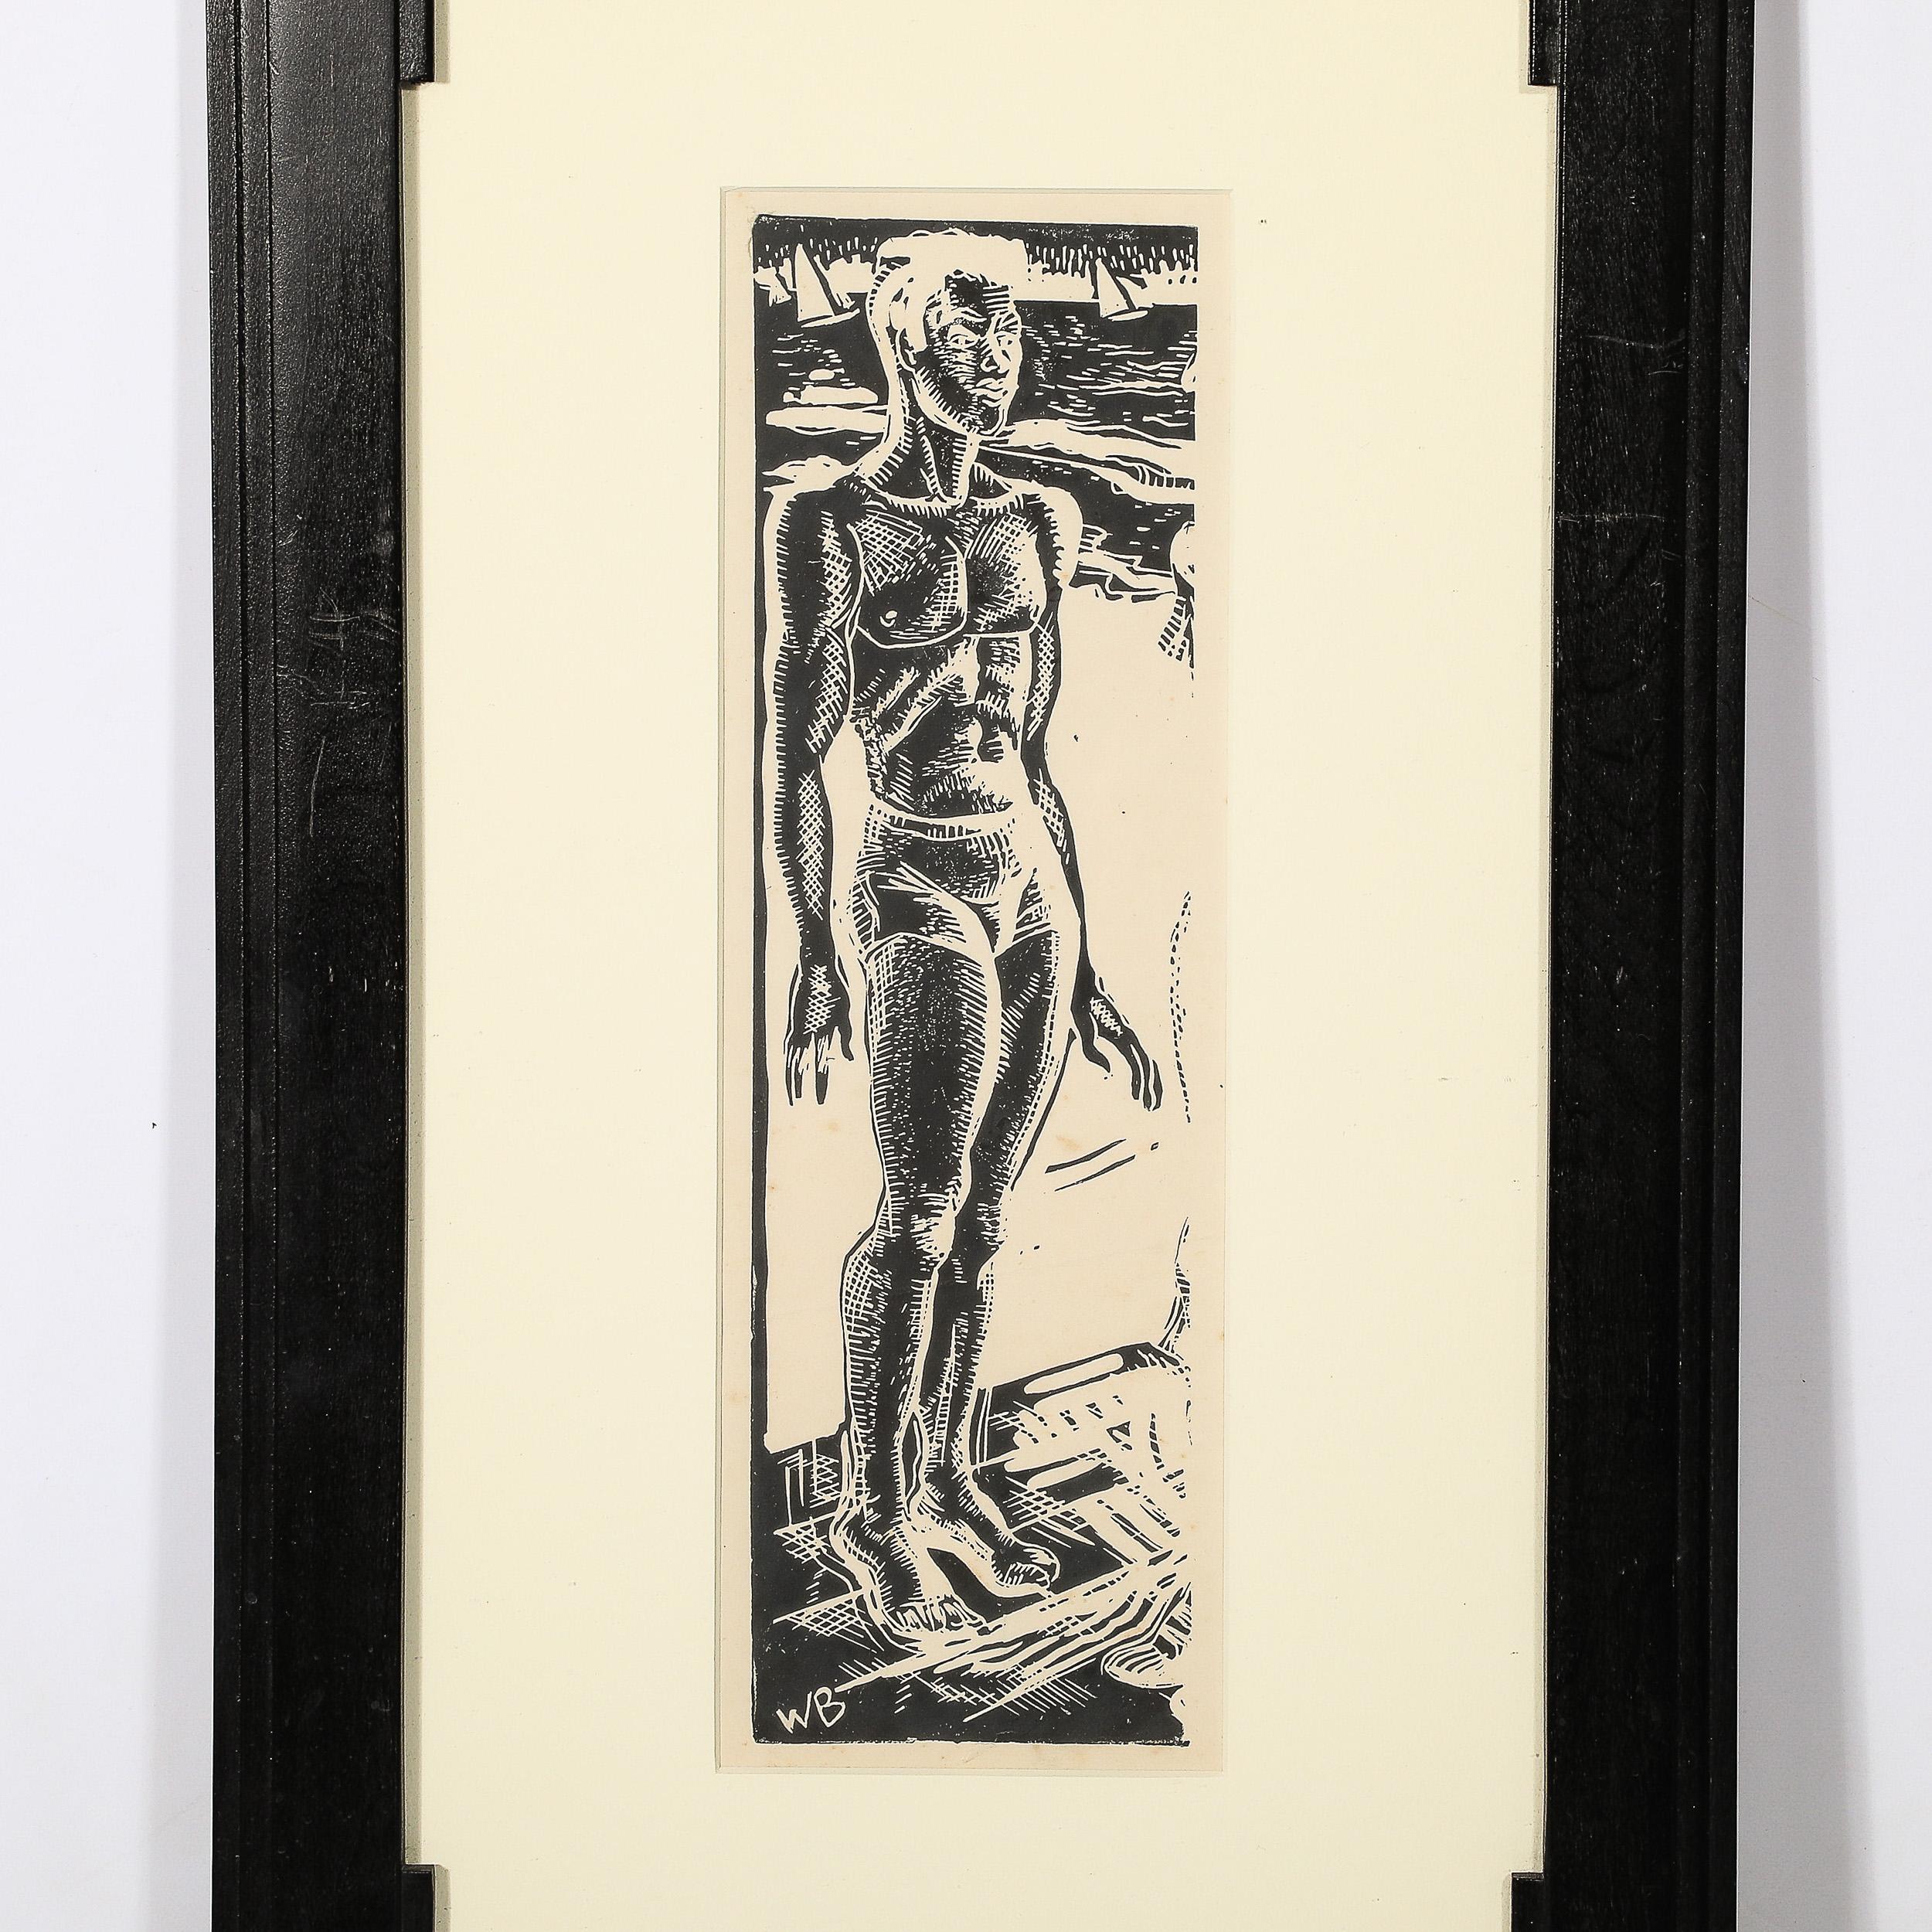 This lovely Art Deco Woodcut of Swimmer W/ Sailboats is by an Unknown artist, signed 